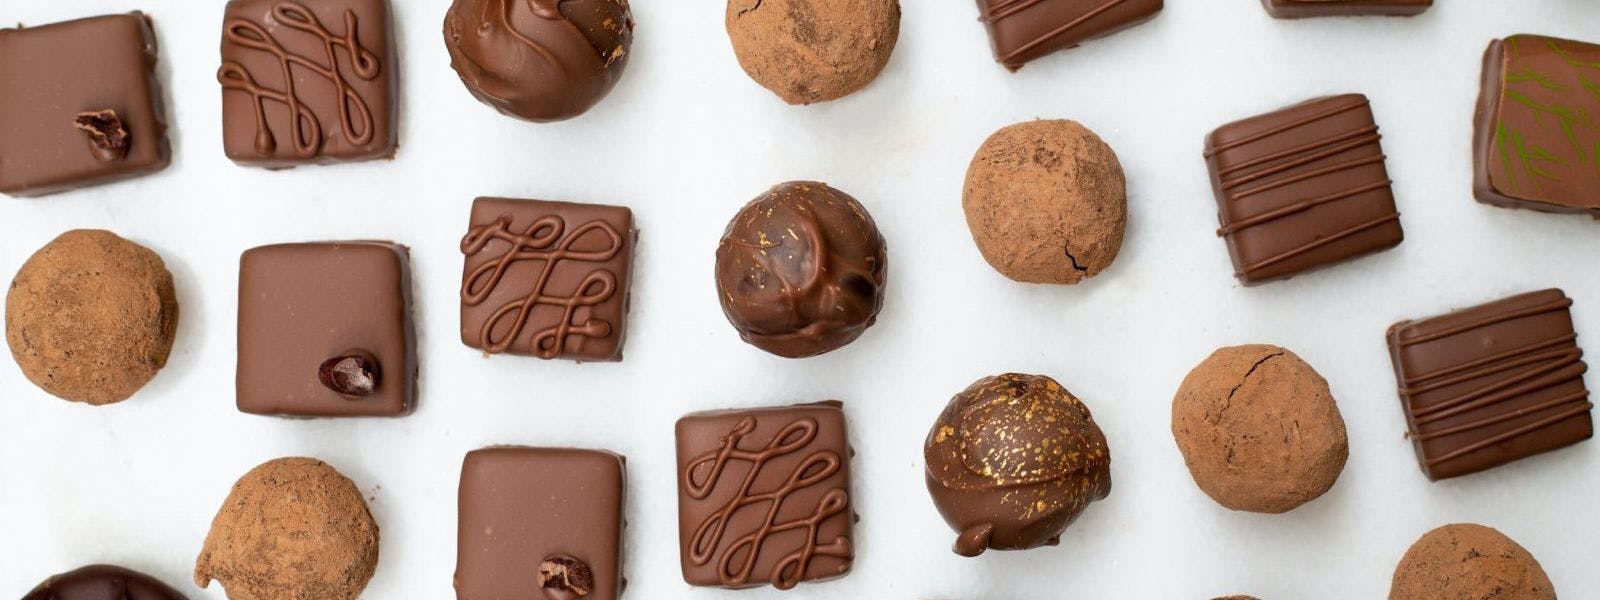 SWEETS FOR YOUR SWEETIE: FOUR SHOPS TO GET CHOCOLATE IN CHARLOTTESVILLE